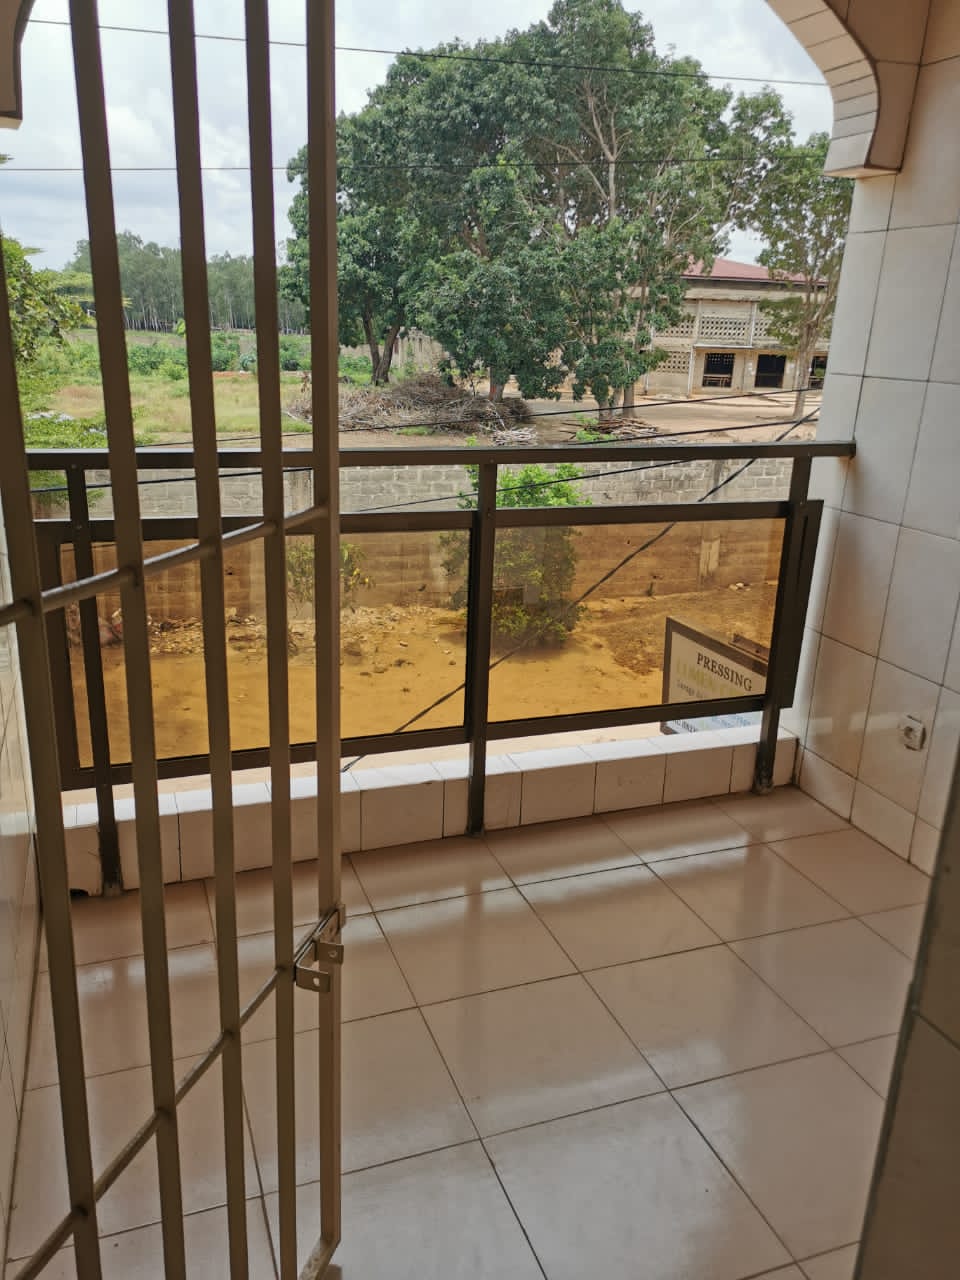 N° 5167 :
                            Appartement meublé à louer , Agbalepedo, Lome, Togo : 300 000 XOF/mois